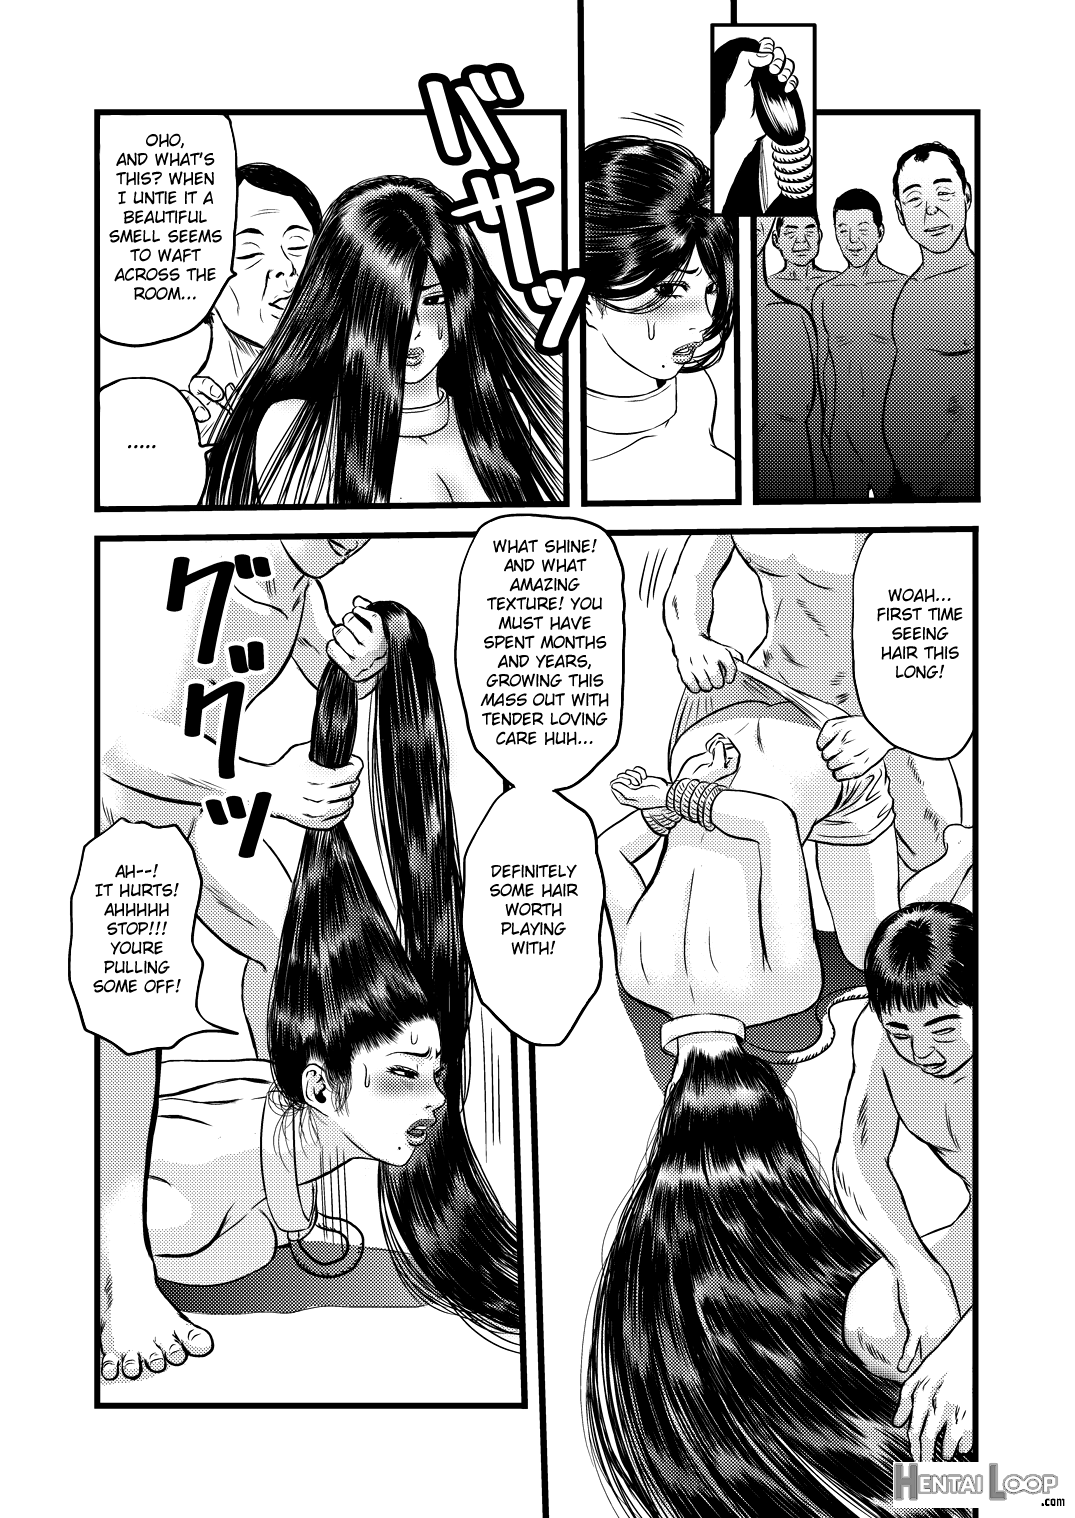 Our Married Sex Slave: Final. page 6